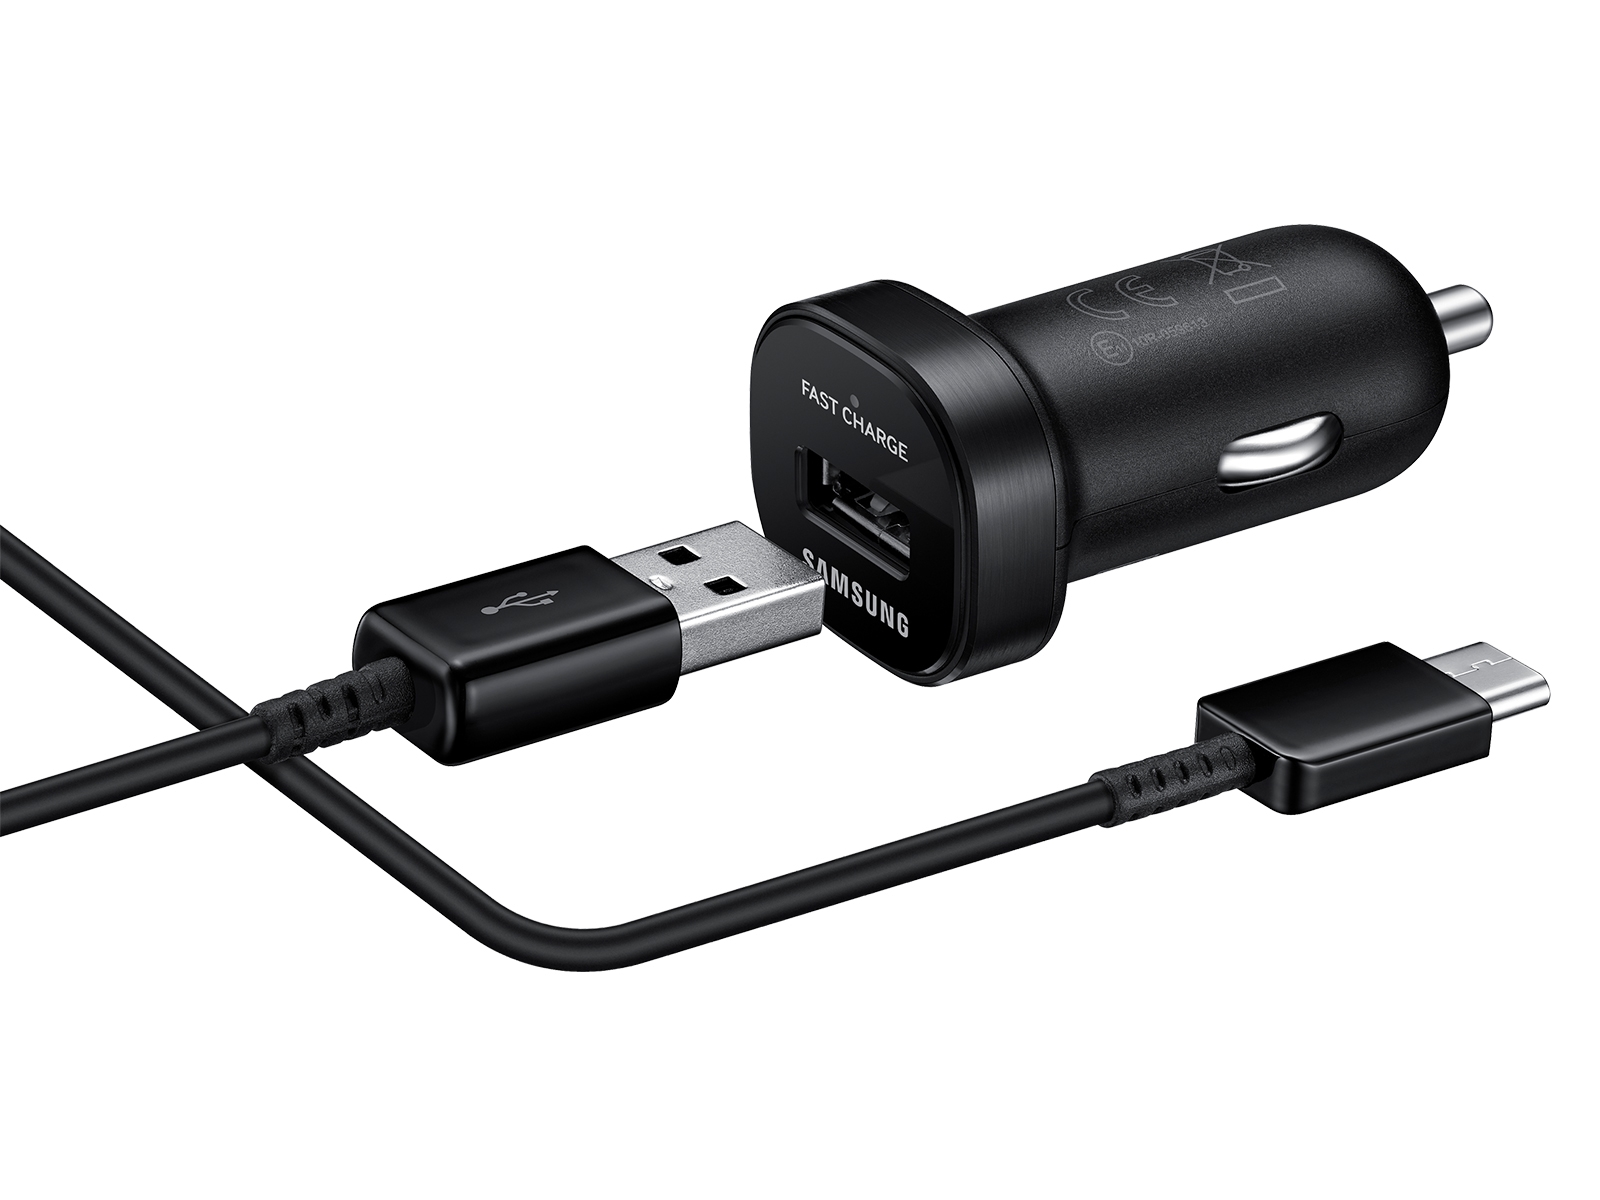 Fast Charge Vehicle (mini) Mobile Accessories - EP-LN930CBEGUS | Samsung US